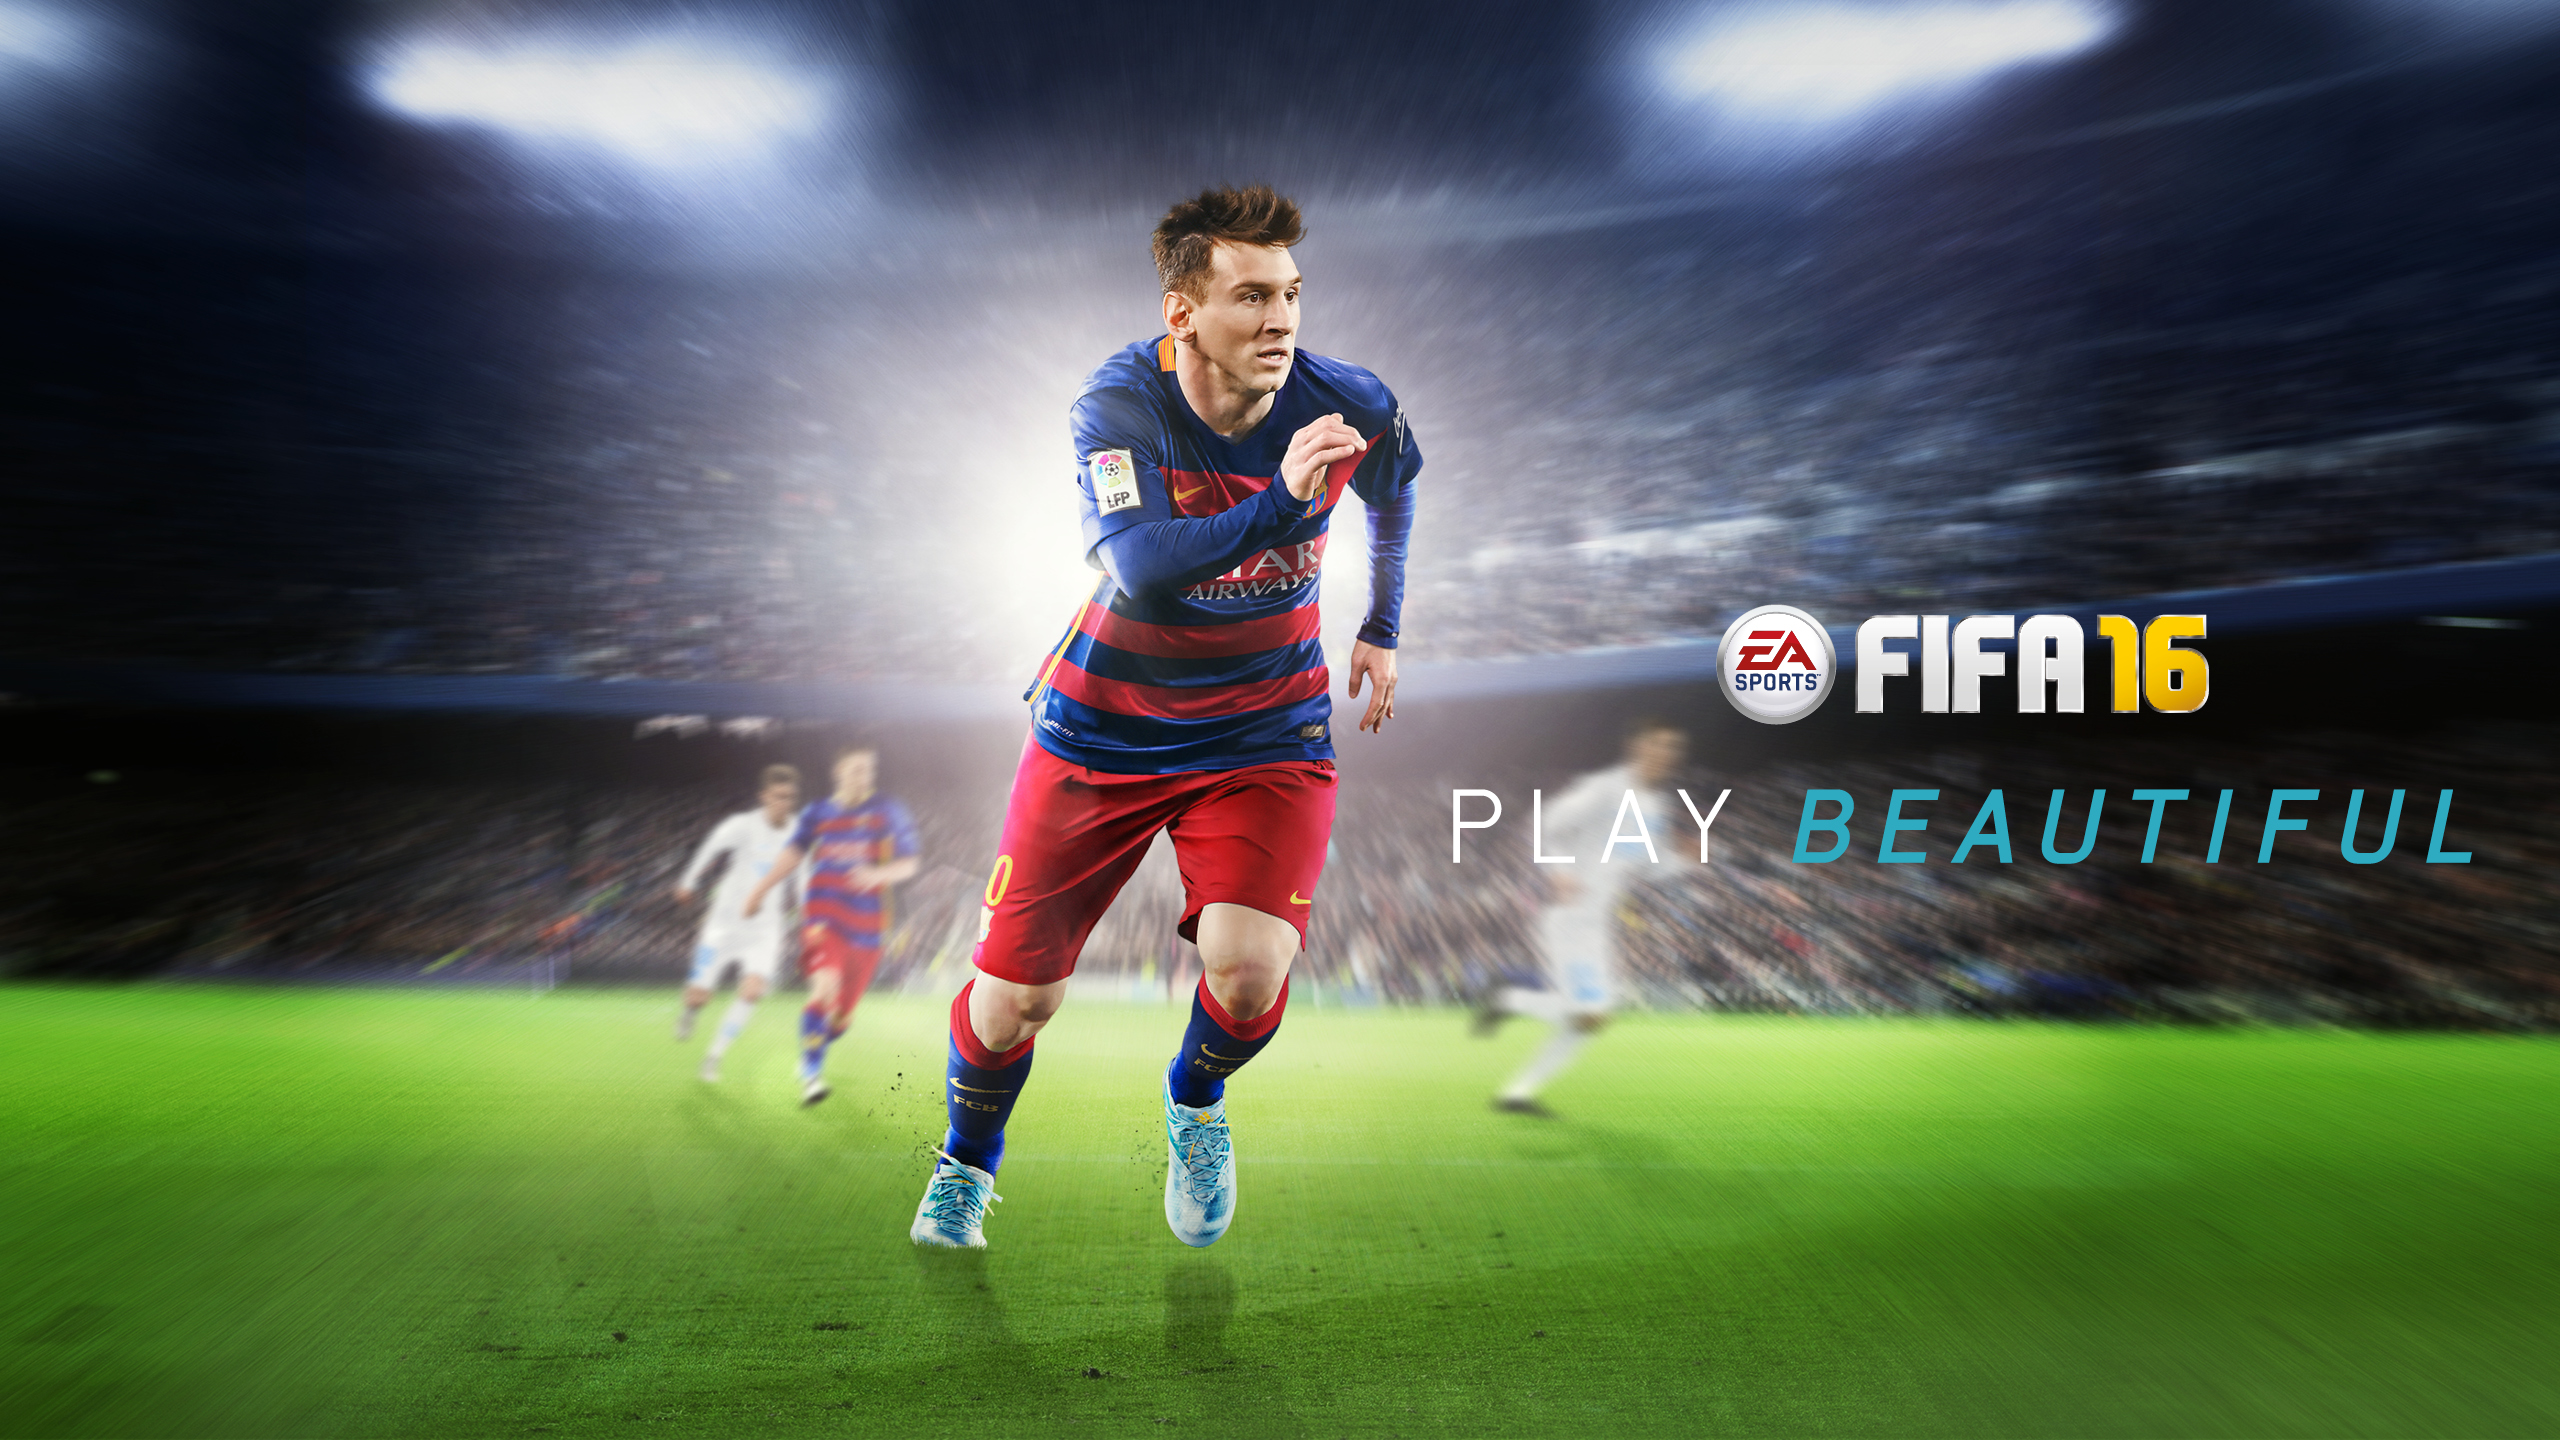 FIFA 16 Game Wallpapers | Wallpapers HD